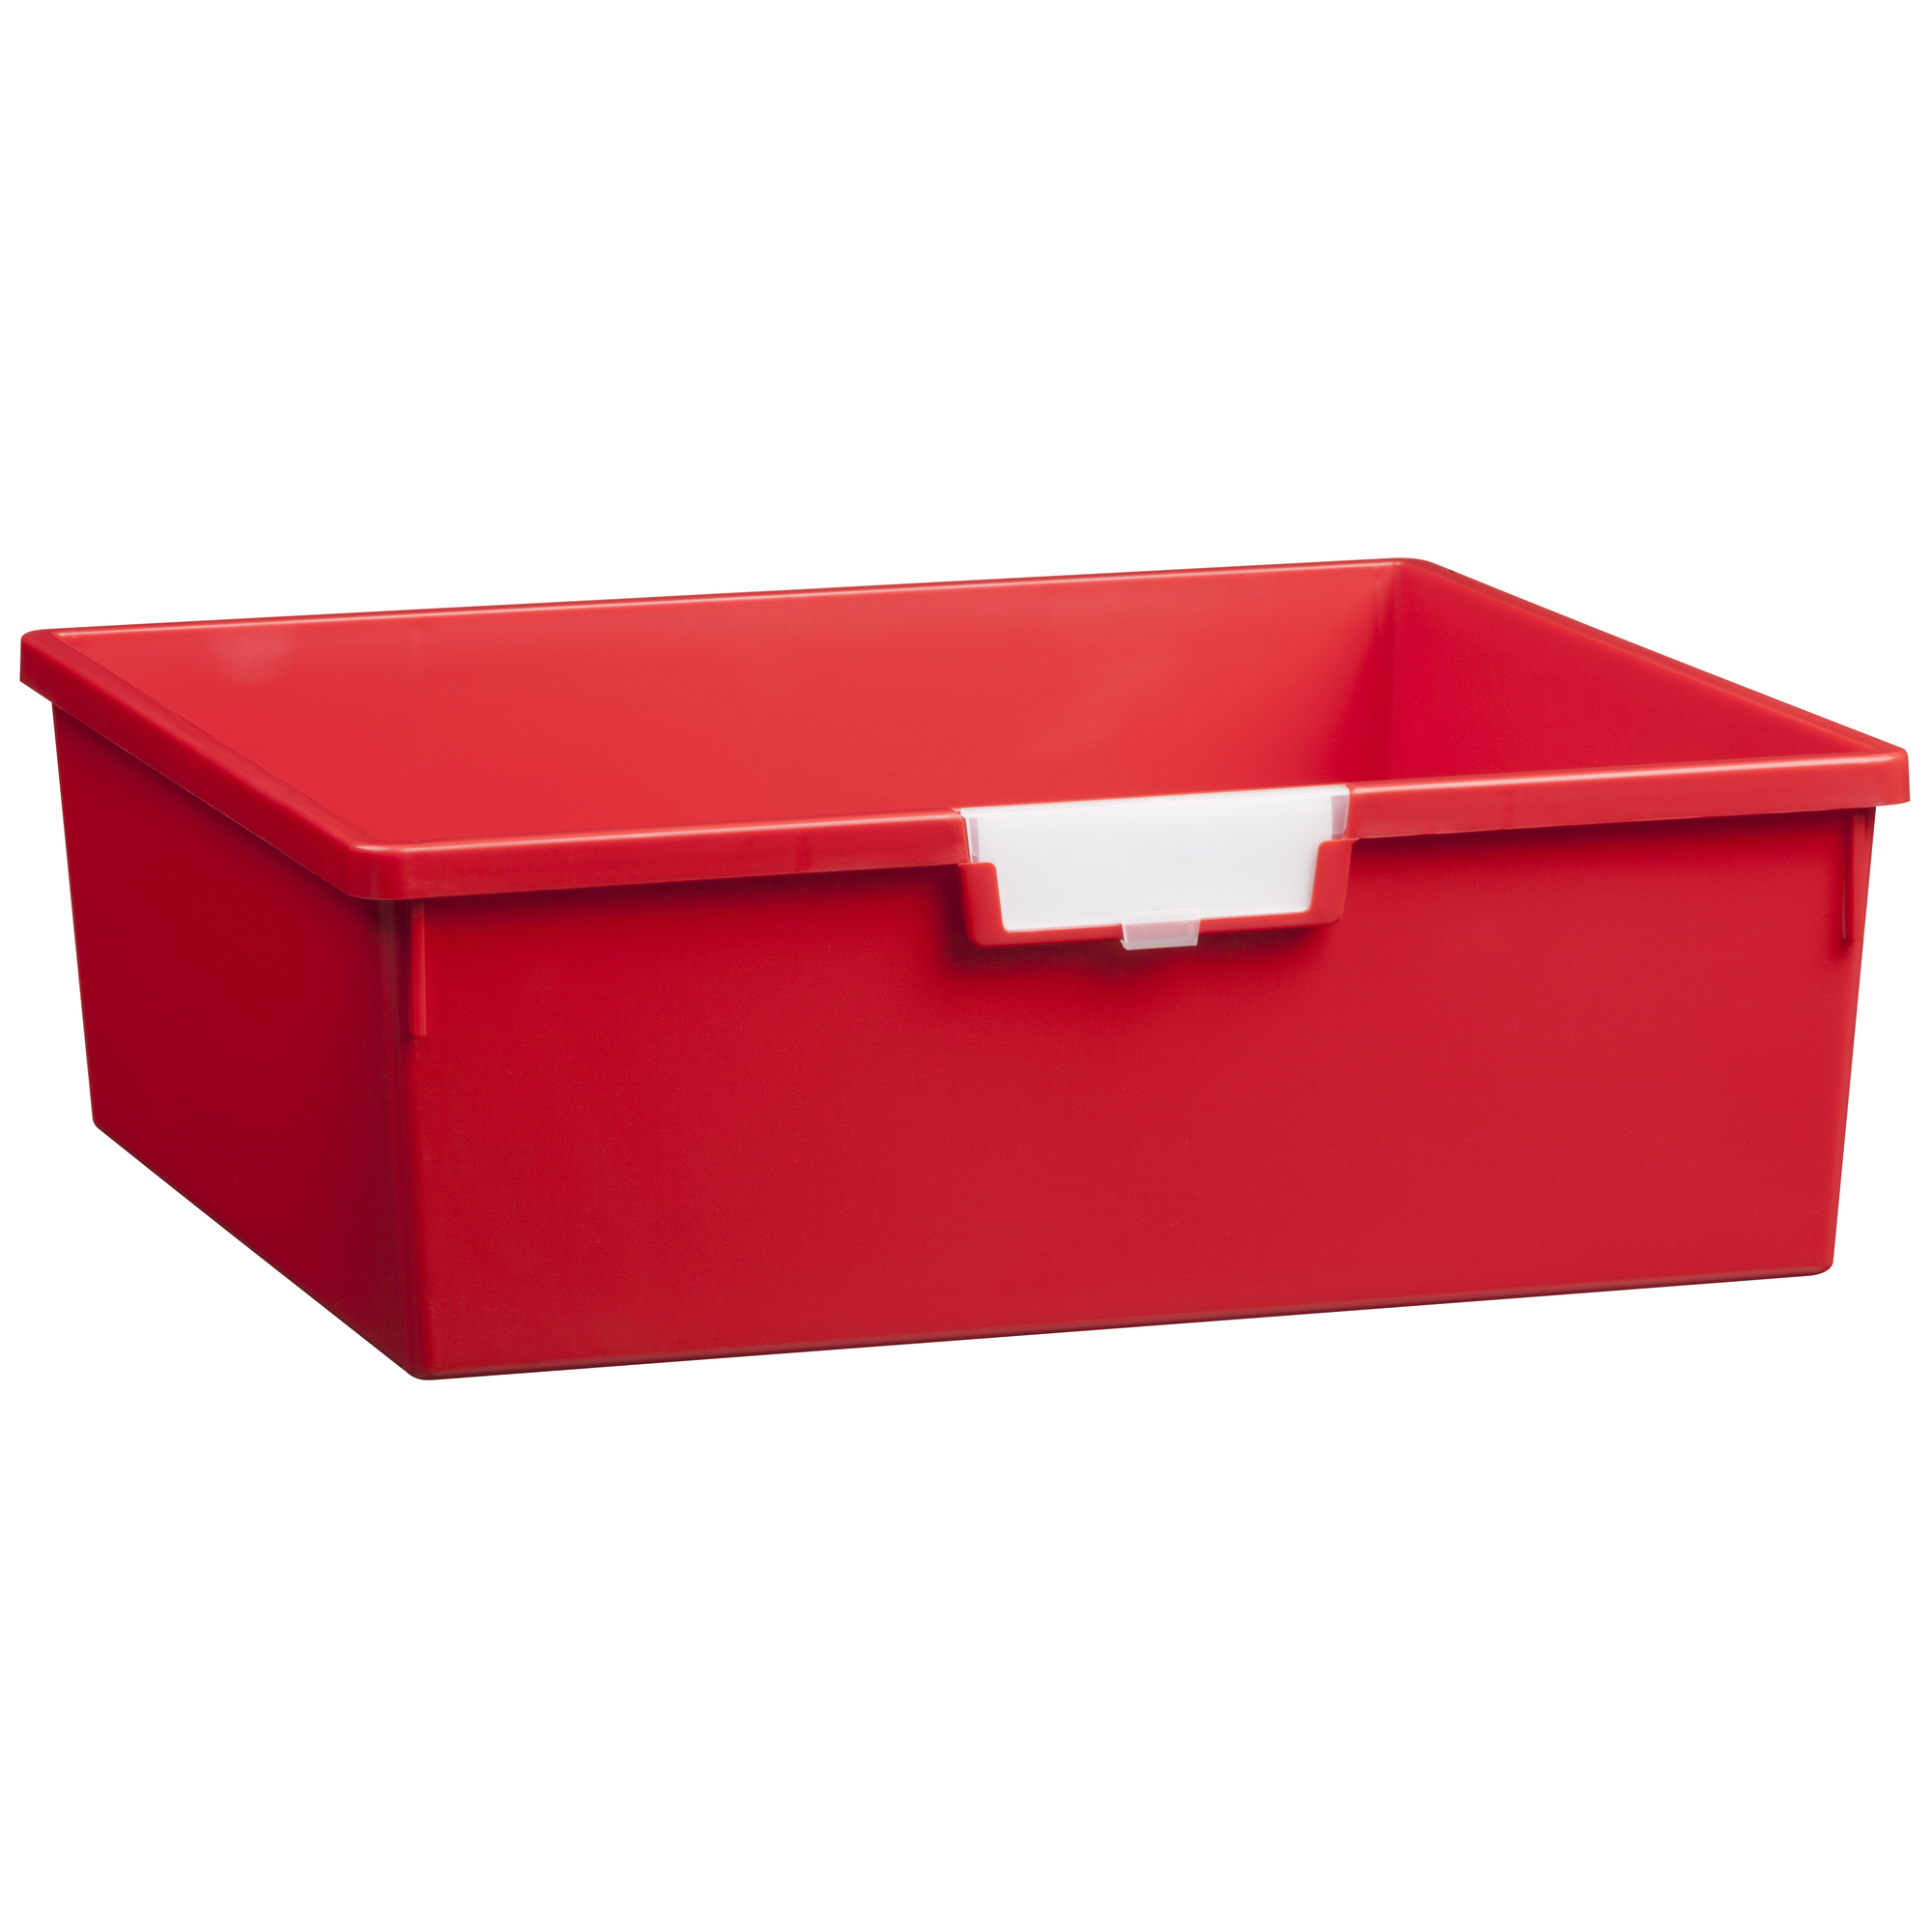 Certwood StorWerks, Wide Line 6Inch Tray in Primary Red-1PK, Included (qty.) 1, Material Plastic, Height 6 in, Model CE1958PR1